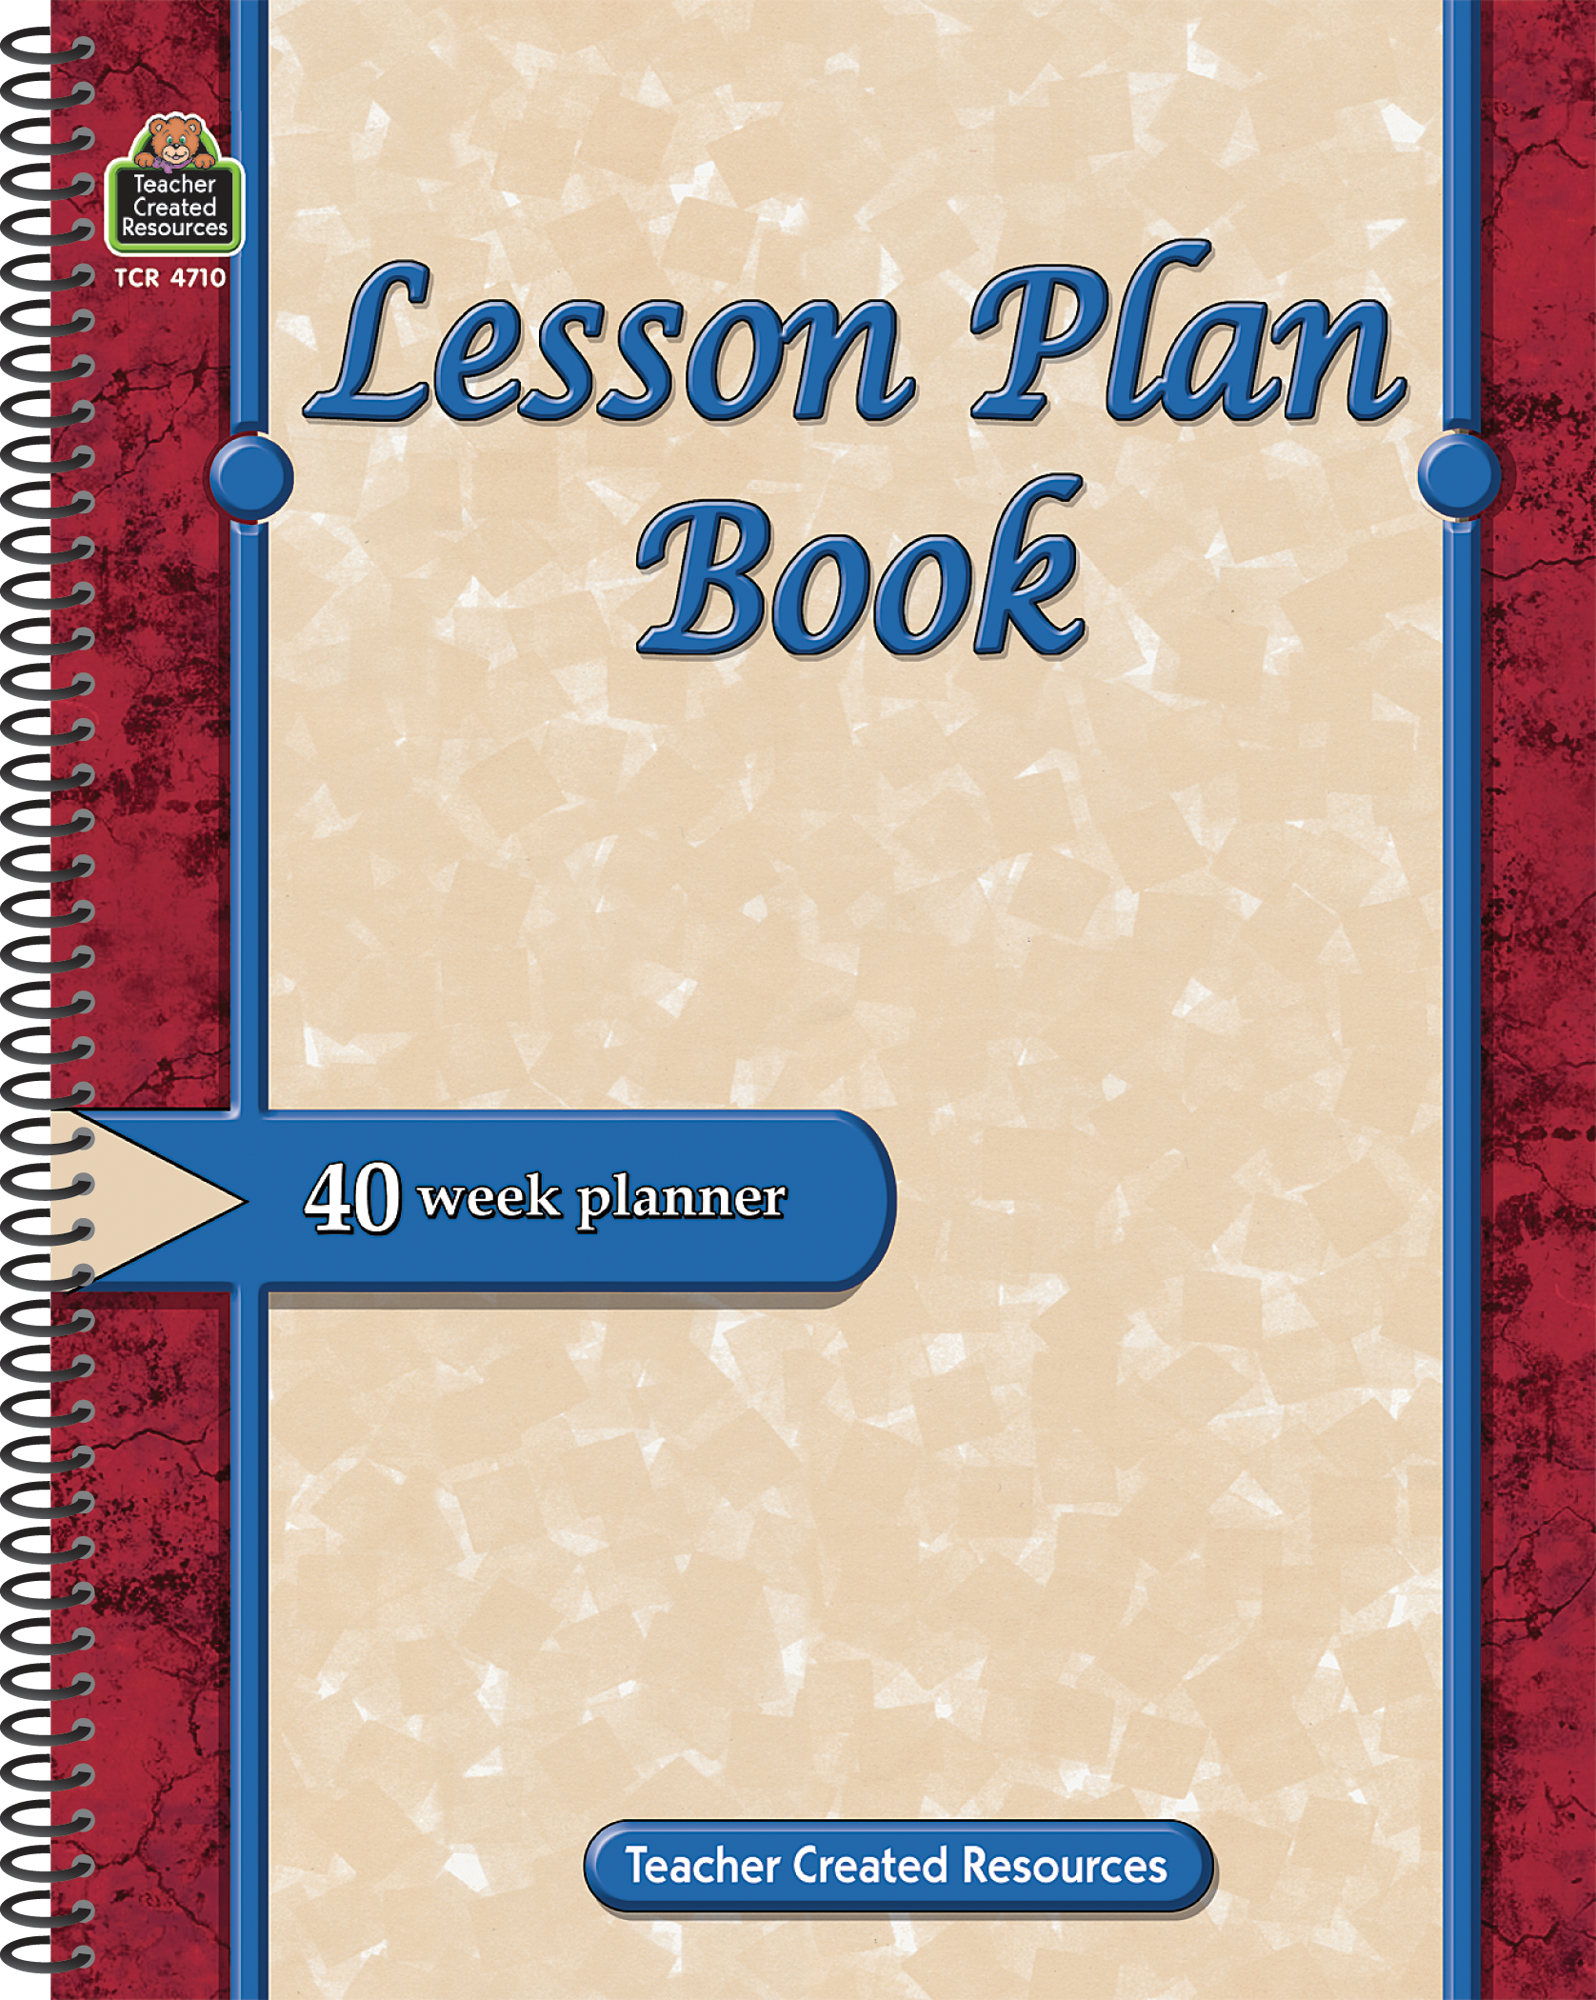 11 x 8-1/2 Green 8 Class Periods/Day Wirebound 100 Pages Lesson Plan Book 